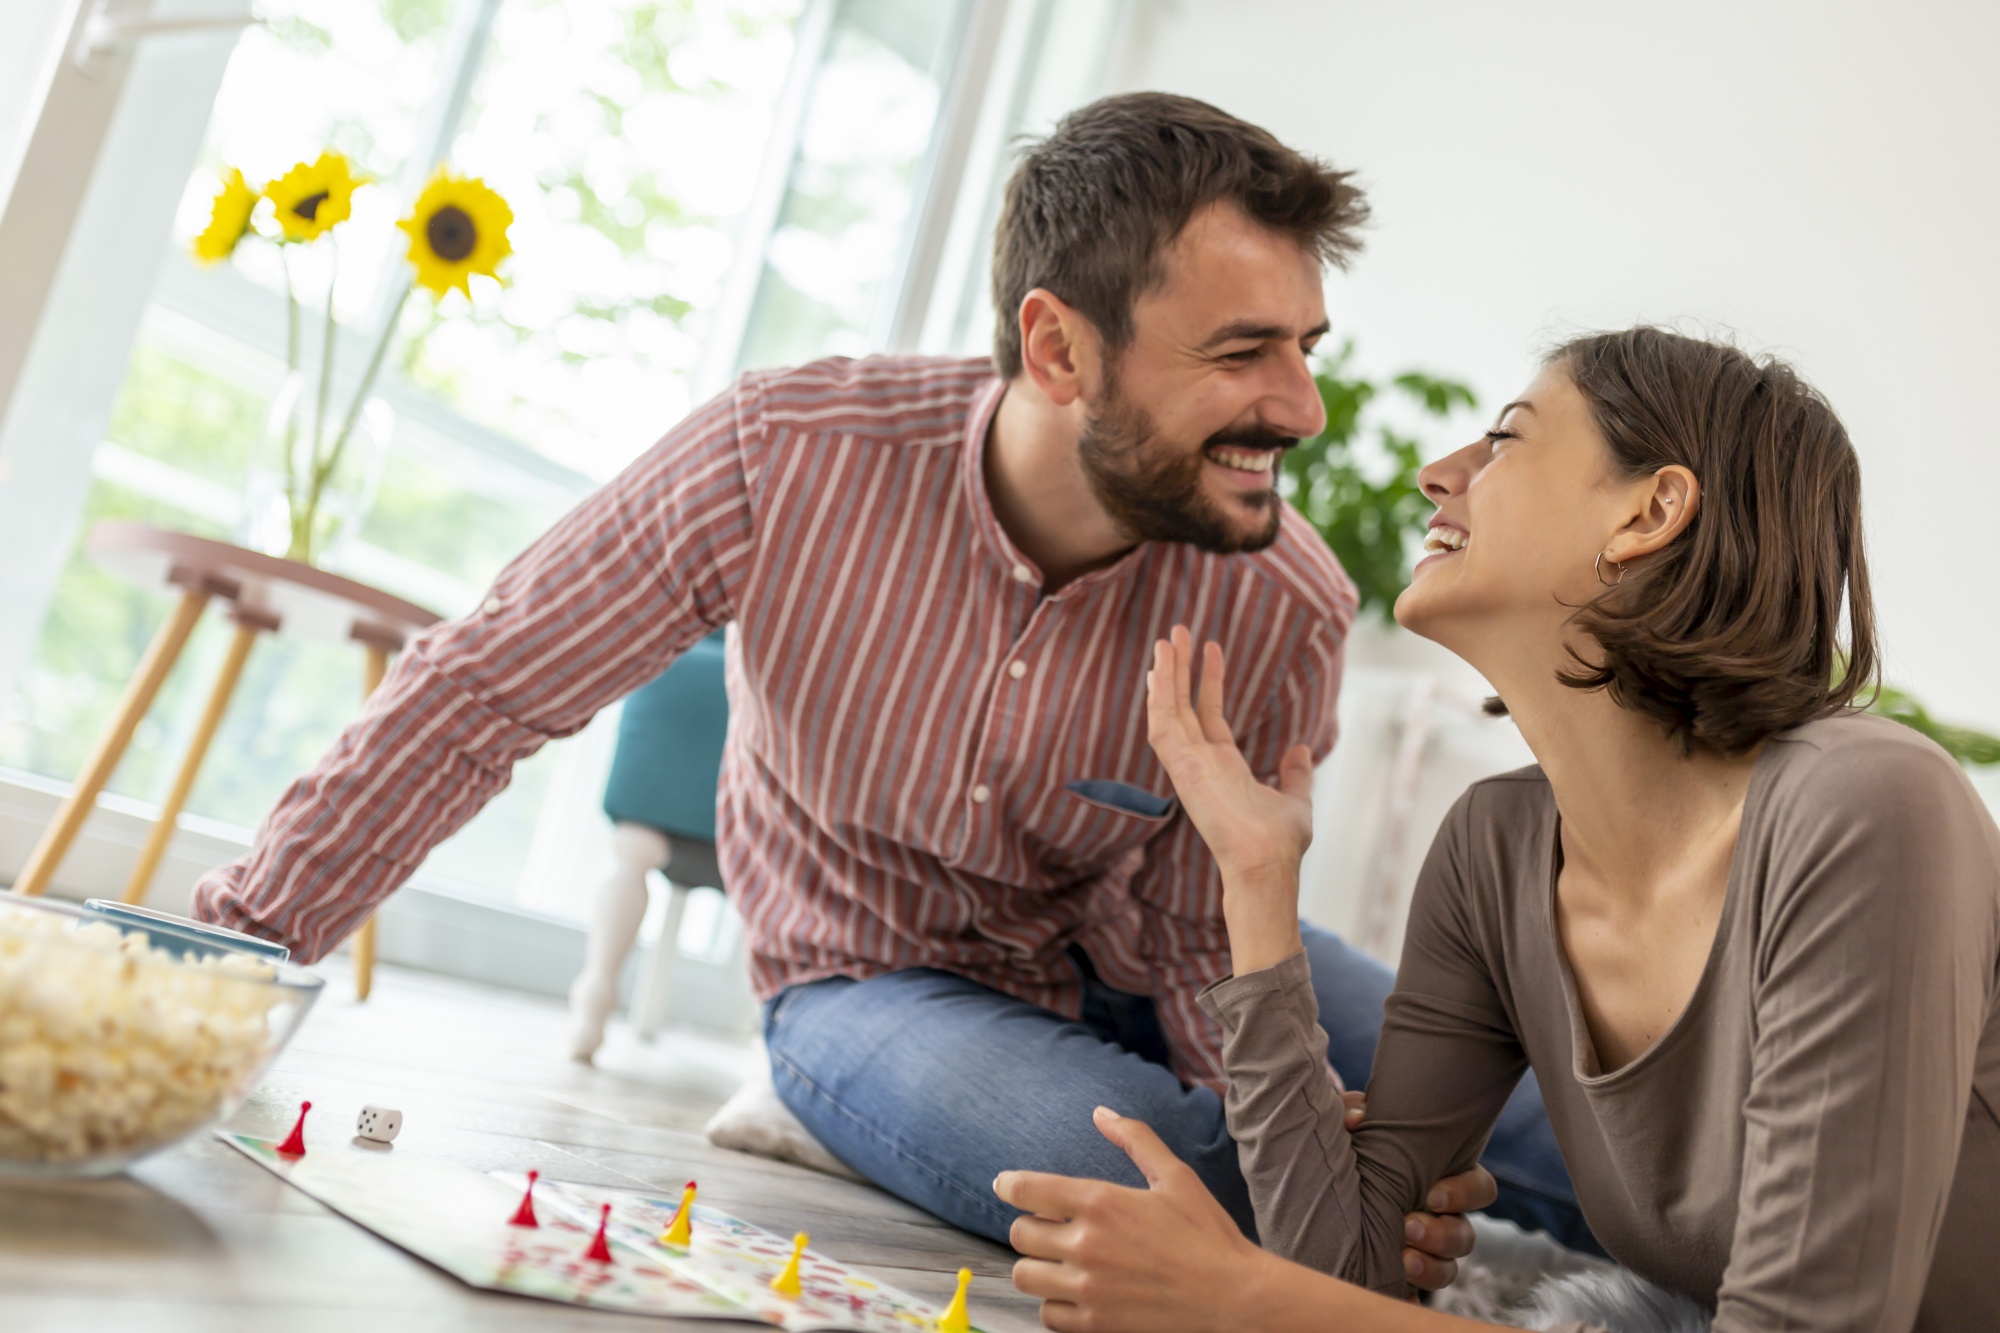 board games for date night, couple laughing having fun playing board game